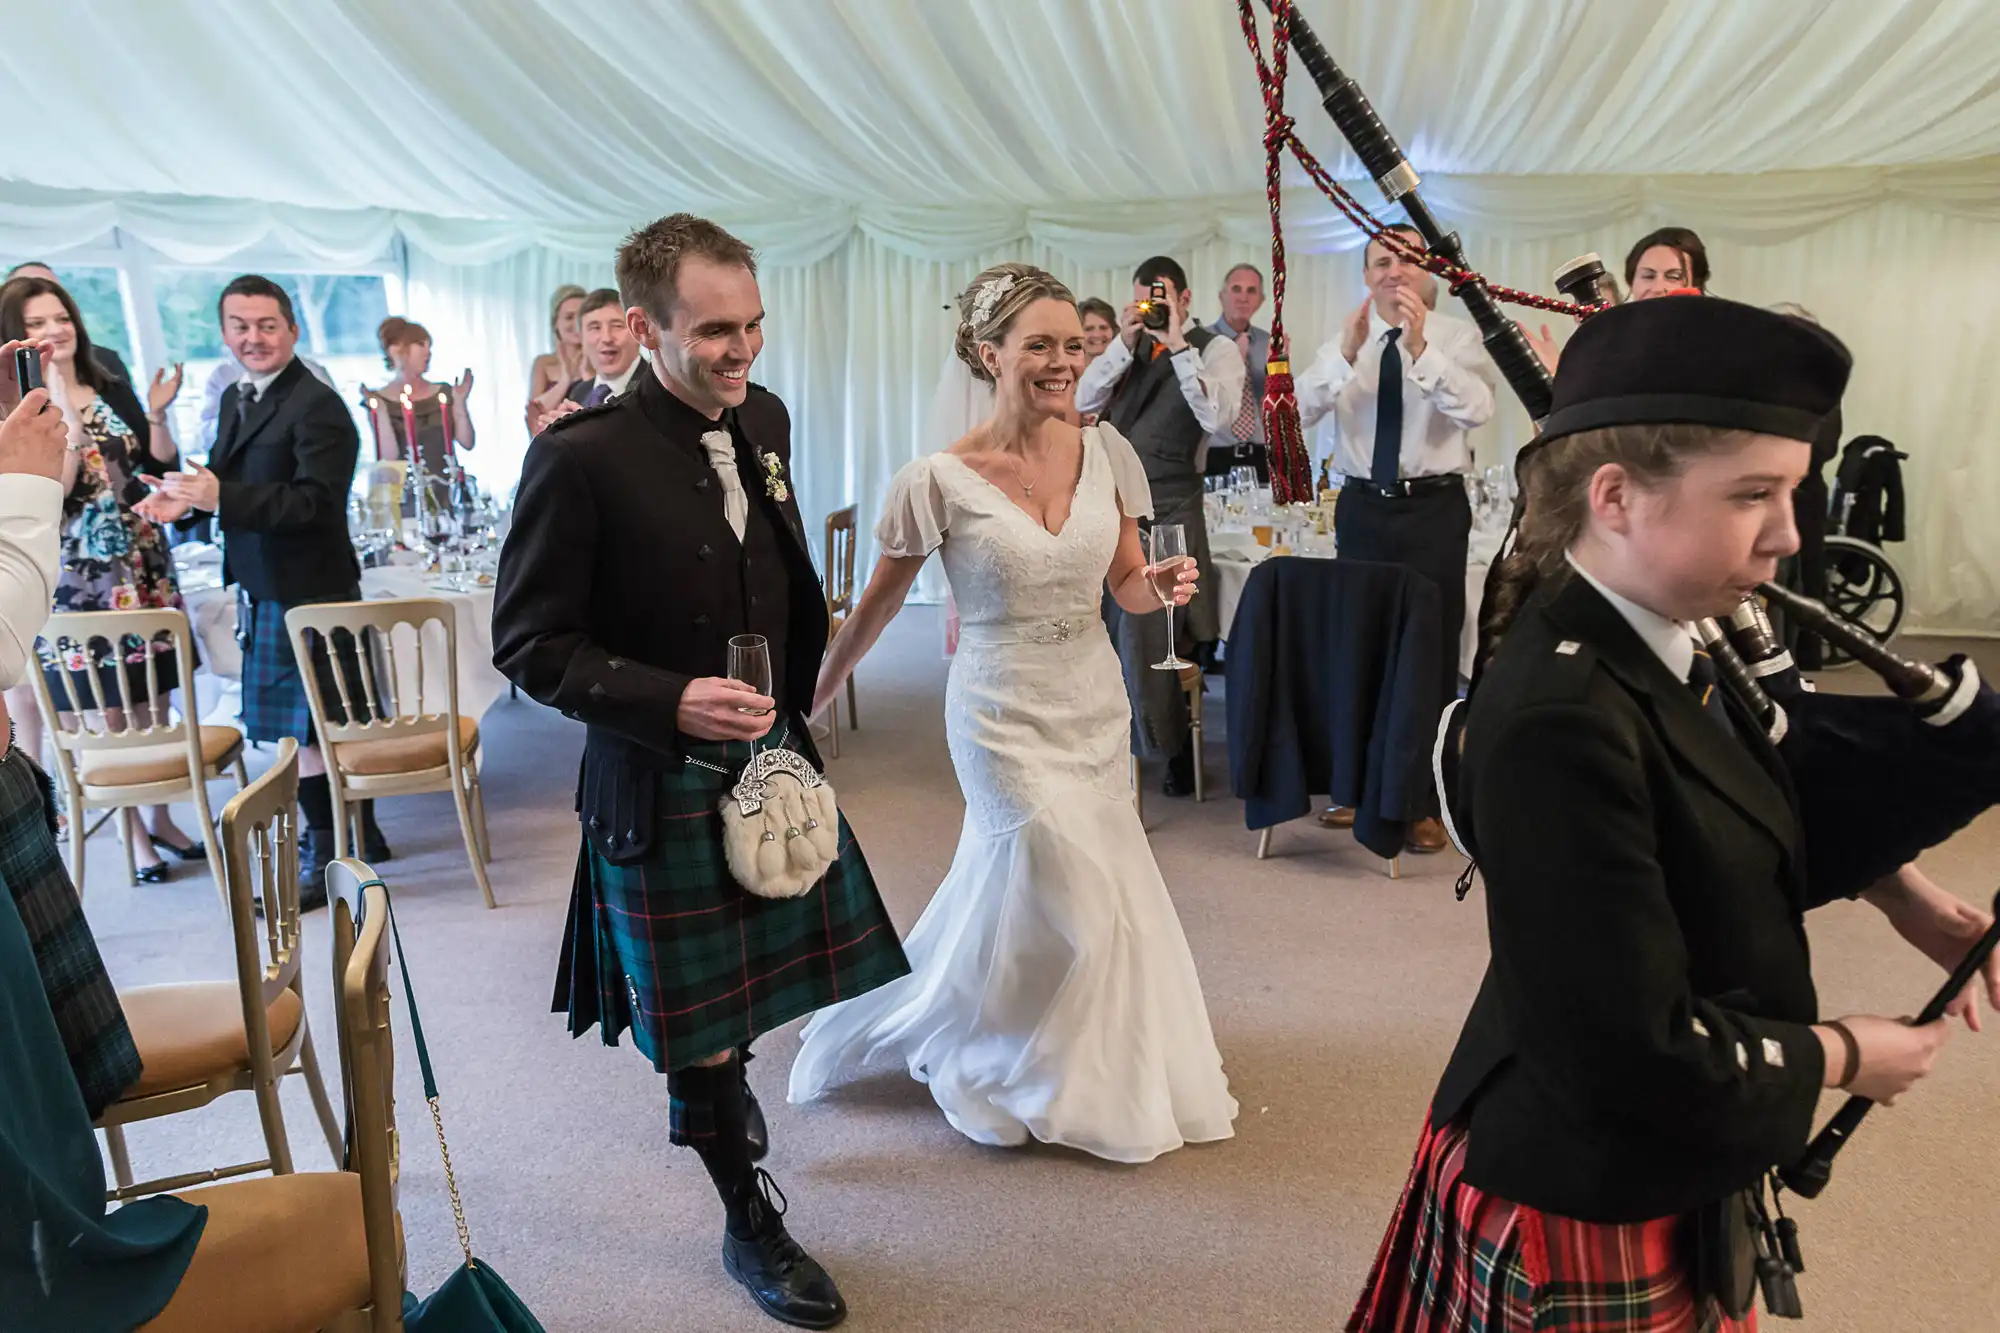 A bride and groom, both smiling, run through a wedding tent followed by a young bagpiper, as guests watch and clap.